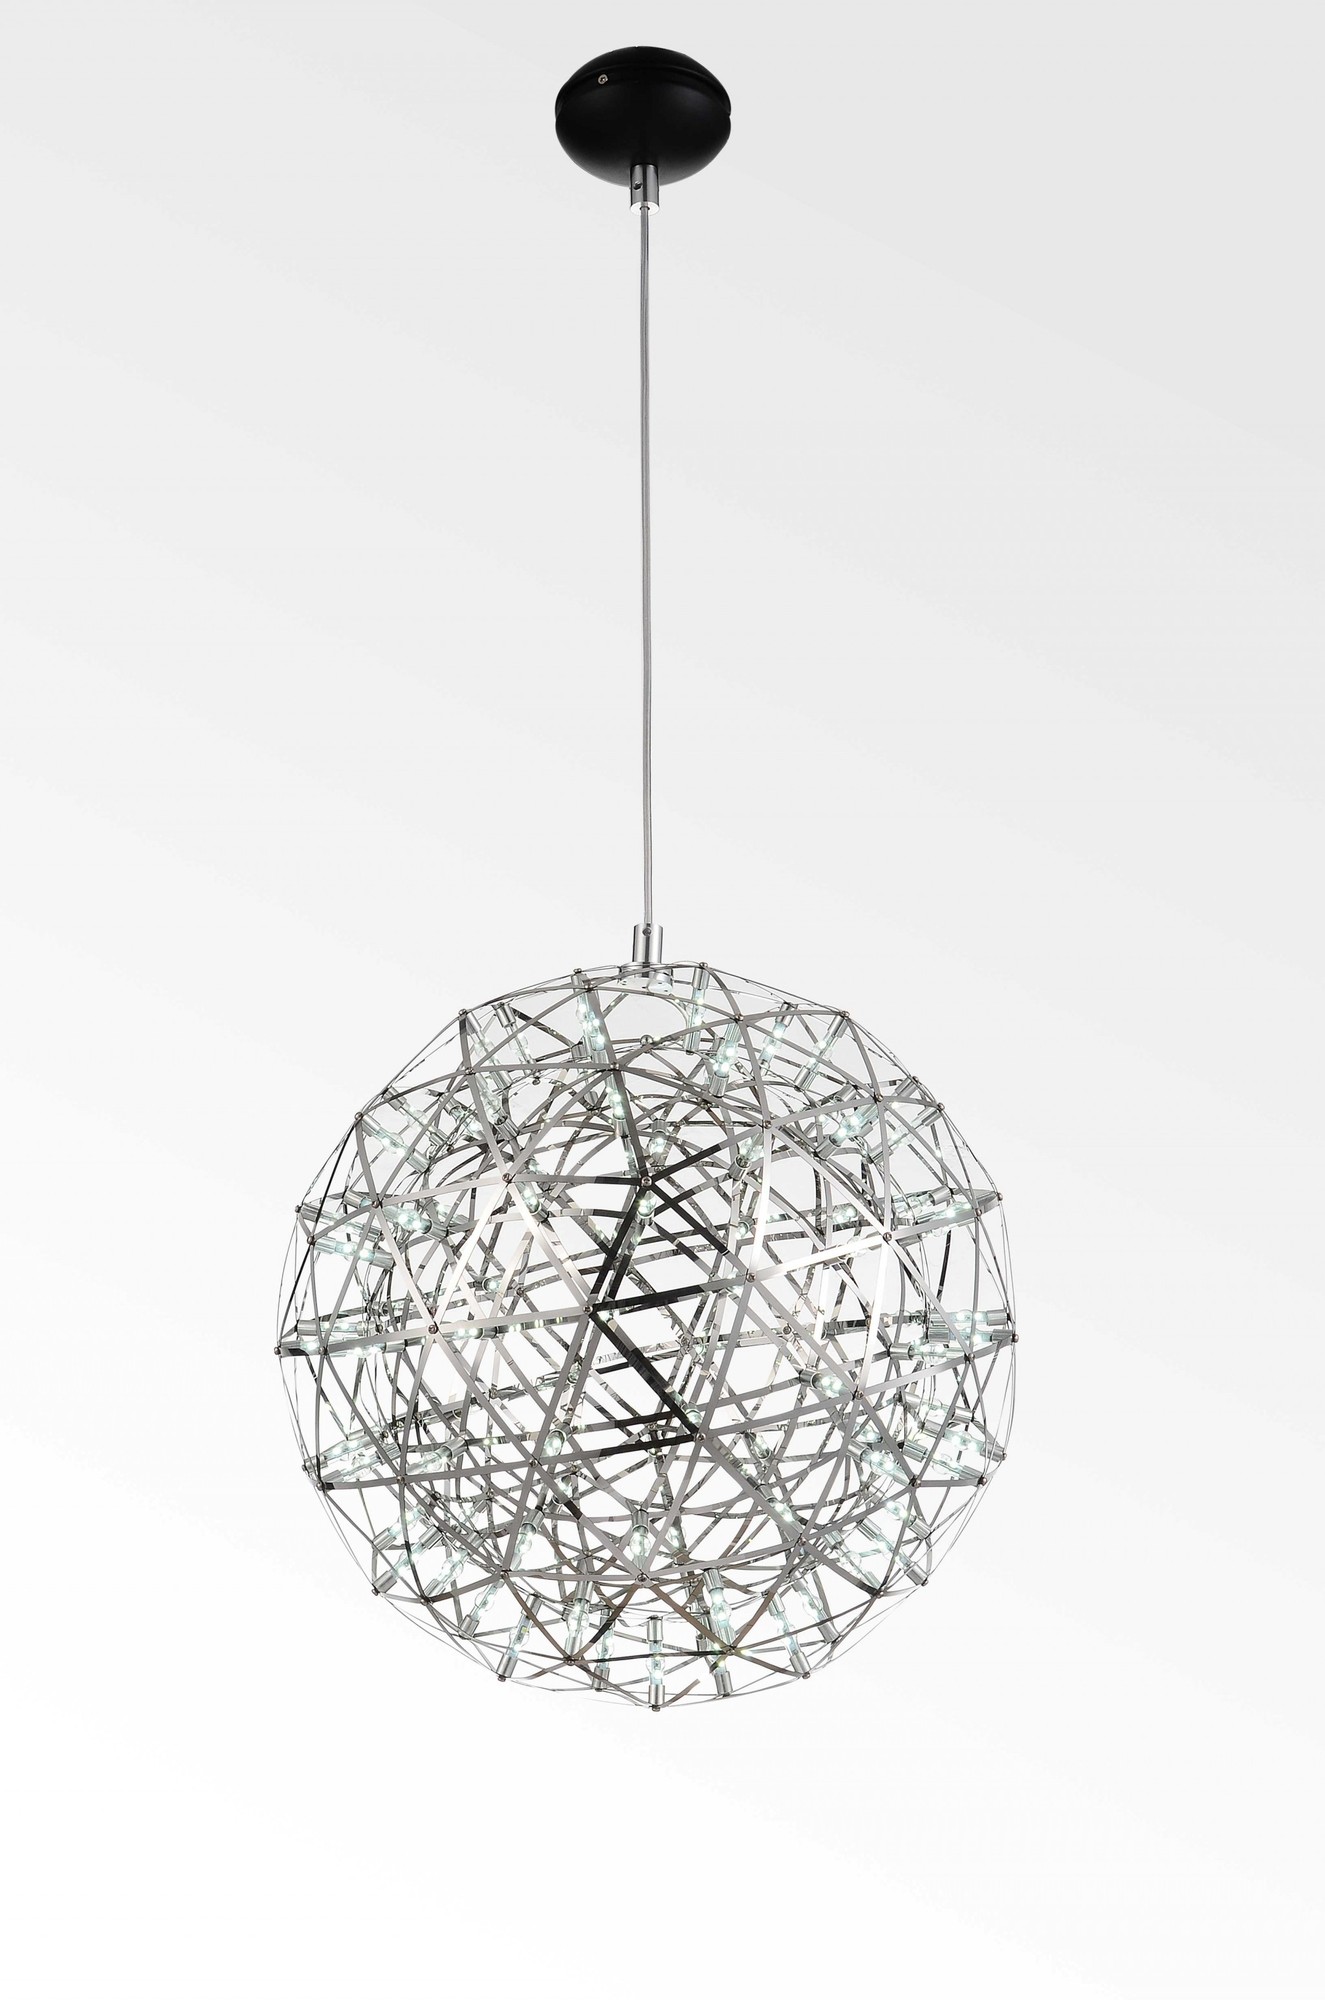 17" X 17" X Stainless Steel Pendant Lamp